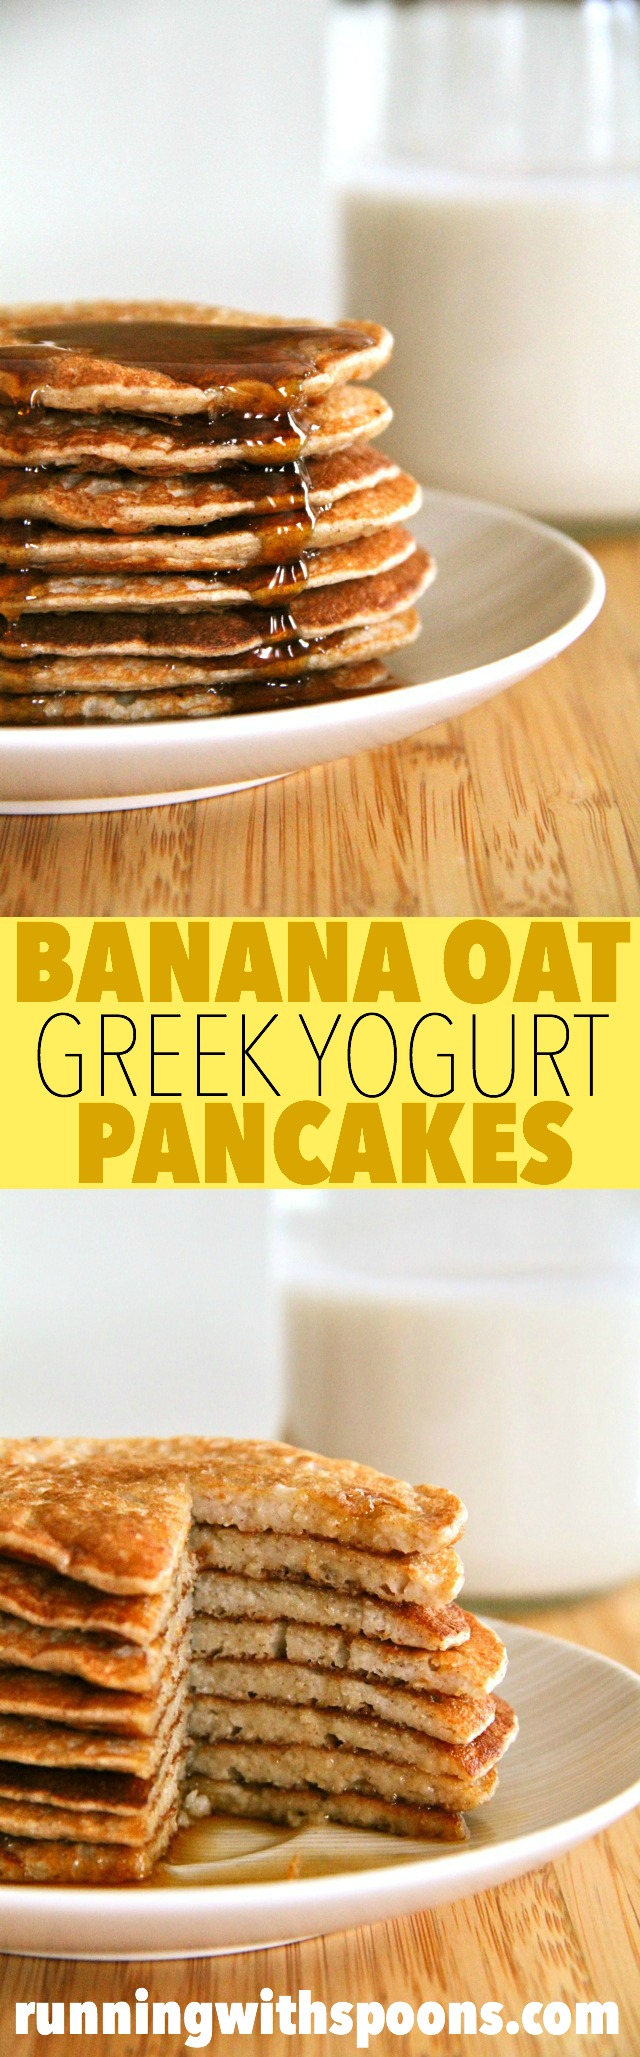 Banana Oat Greek Yogurt Pancakes - a quick and easy gluten-free breakfast that packs over 20g of whole food protein in under 300 calories for the ENTIRE recipe! | runningwithspoons.com #healthy